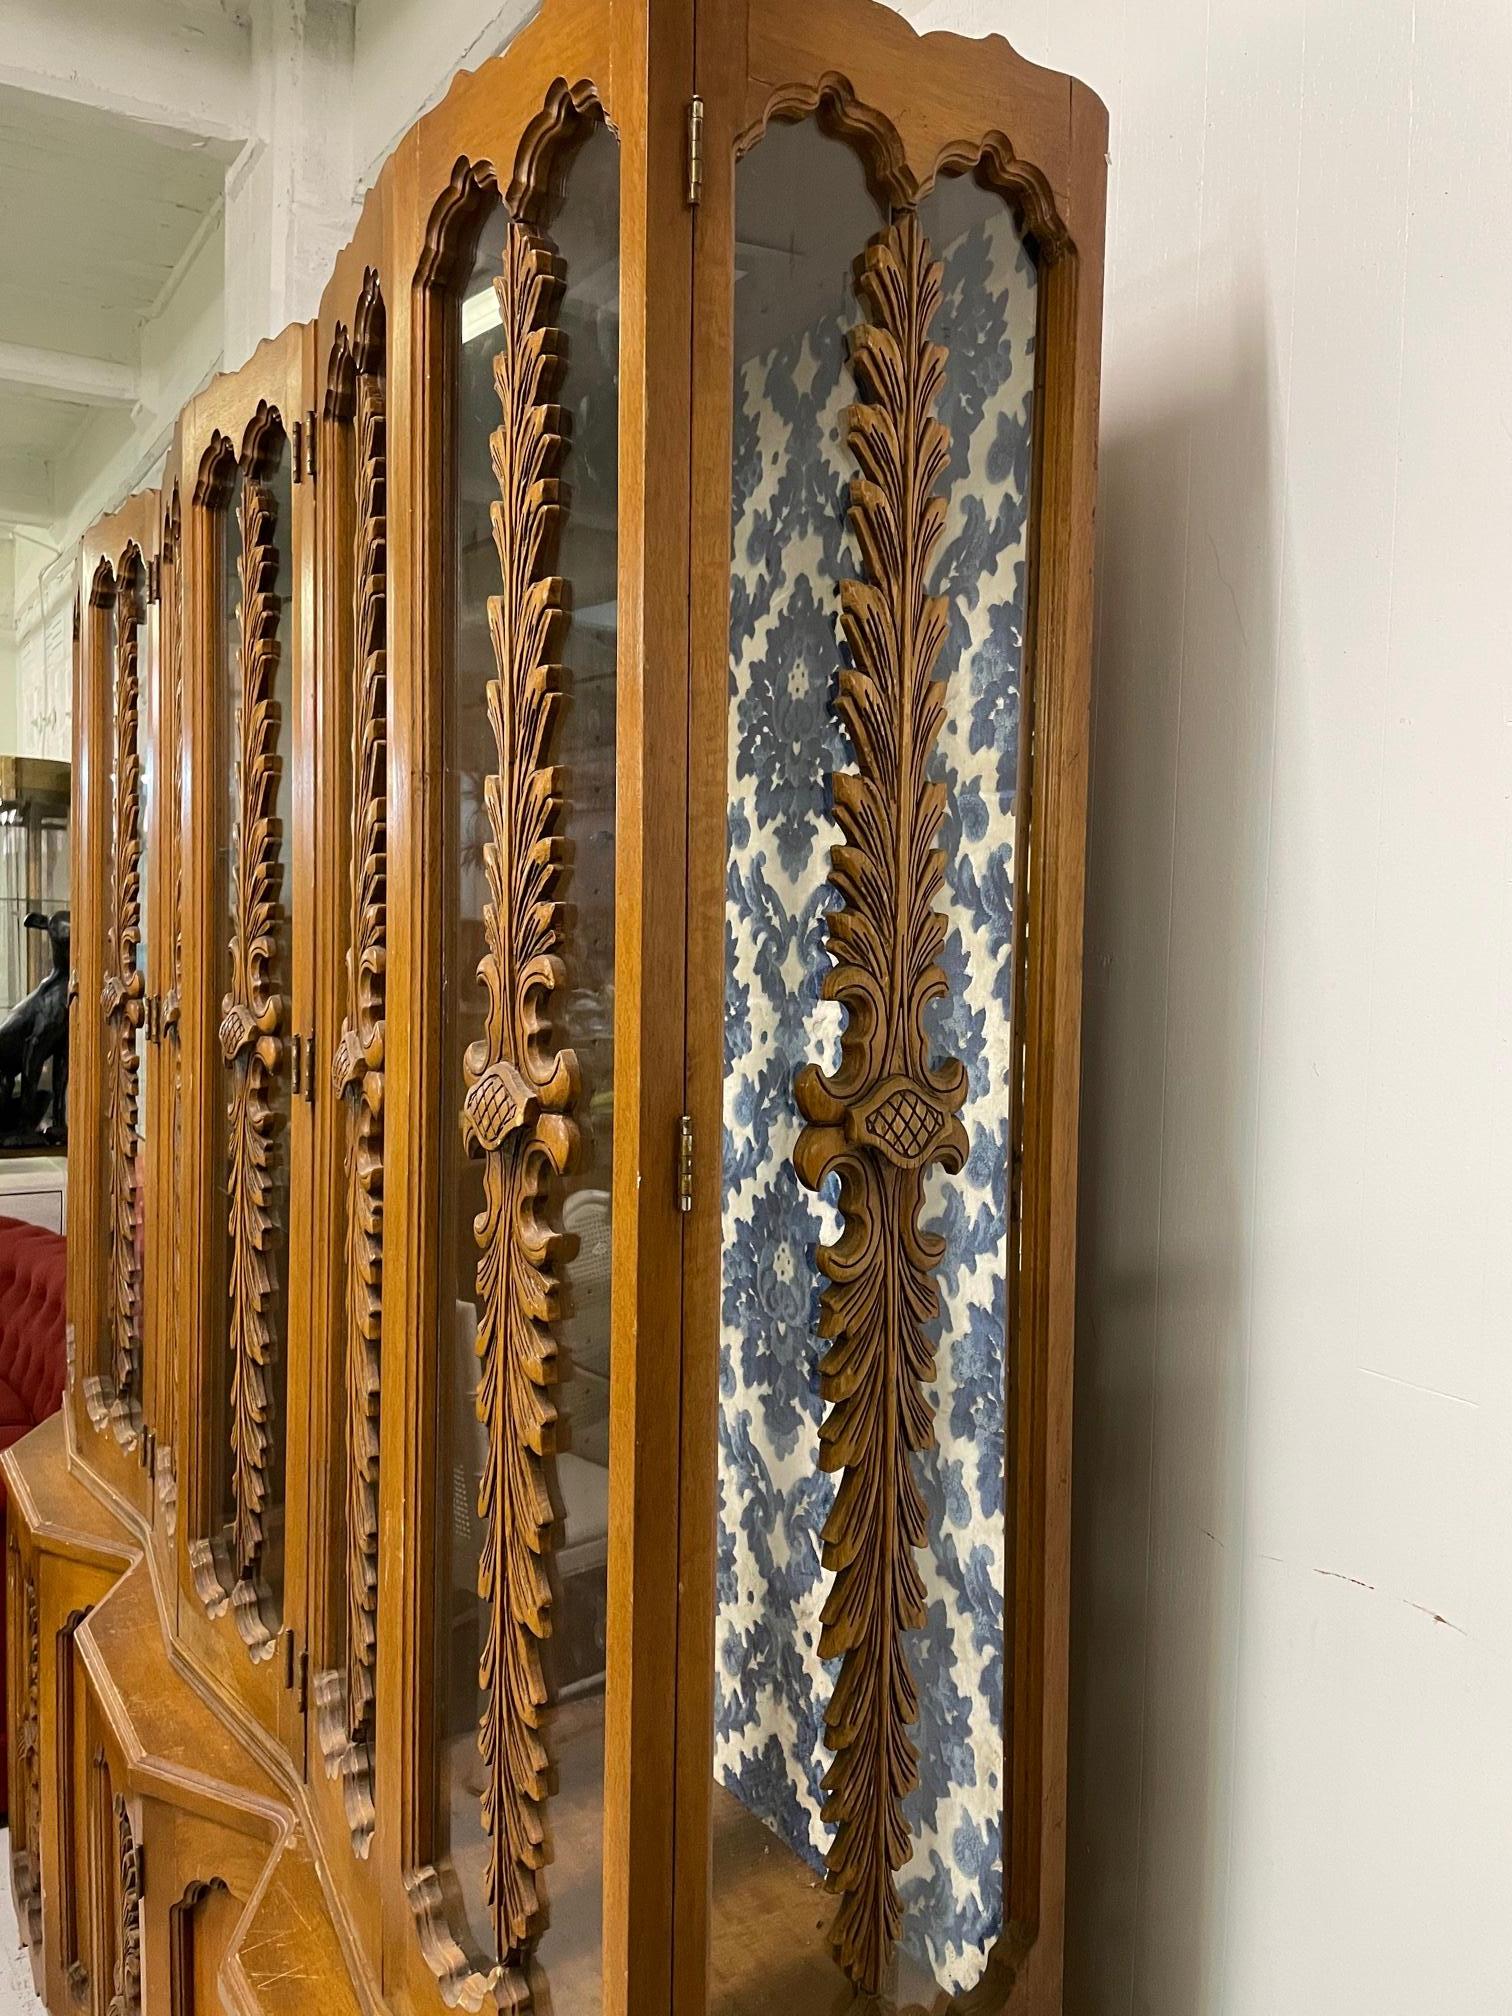 Vintage display cabinet features hand carved detailing in an acanthus leaf motif. Good vintage condition with minor imperfections consistent with age.